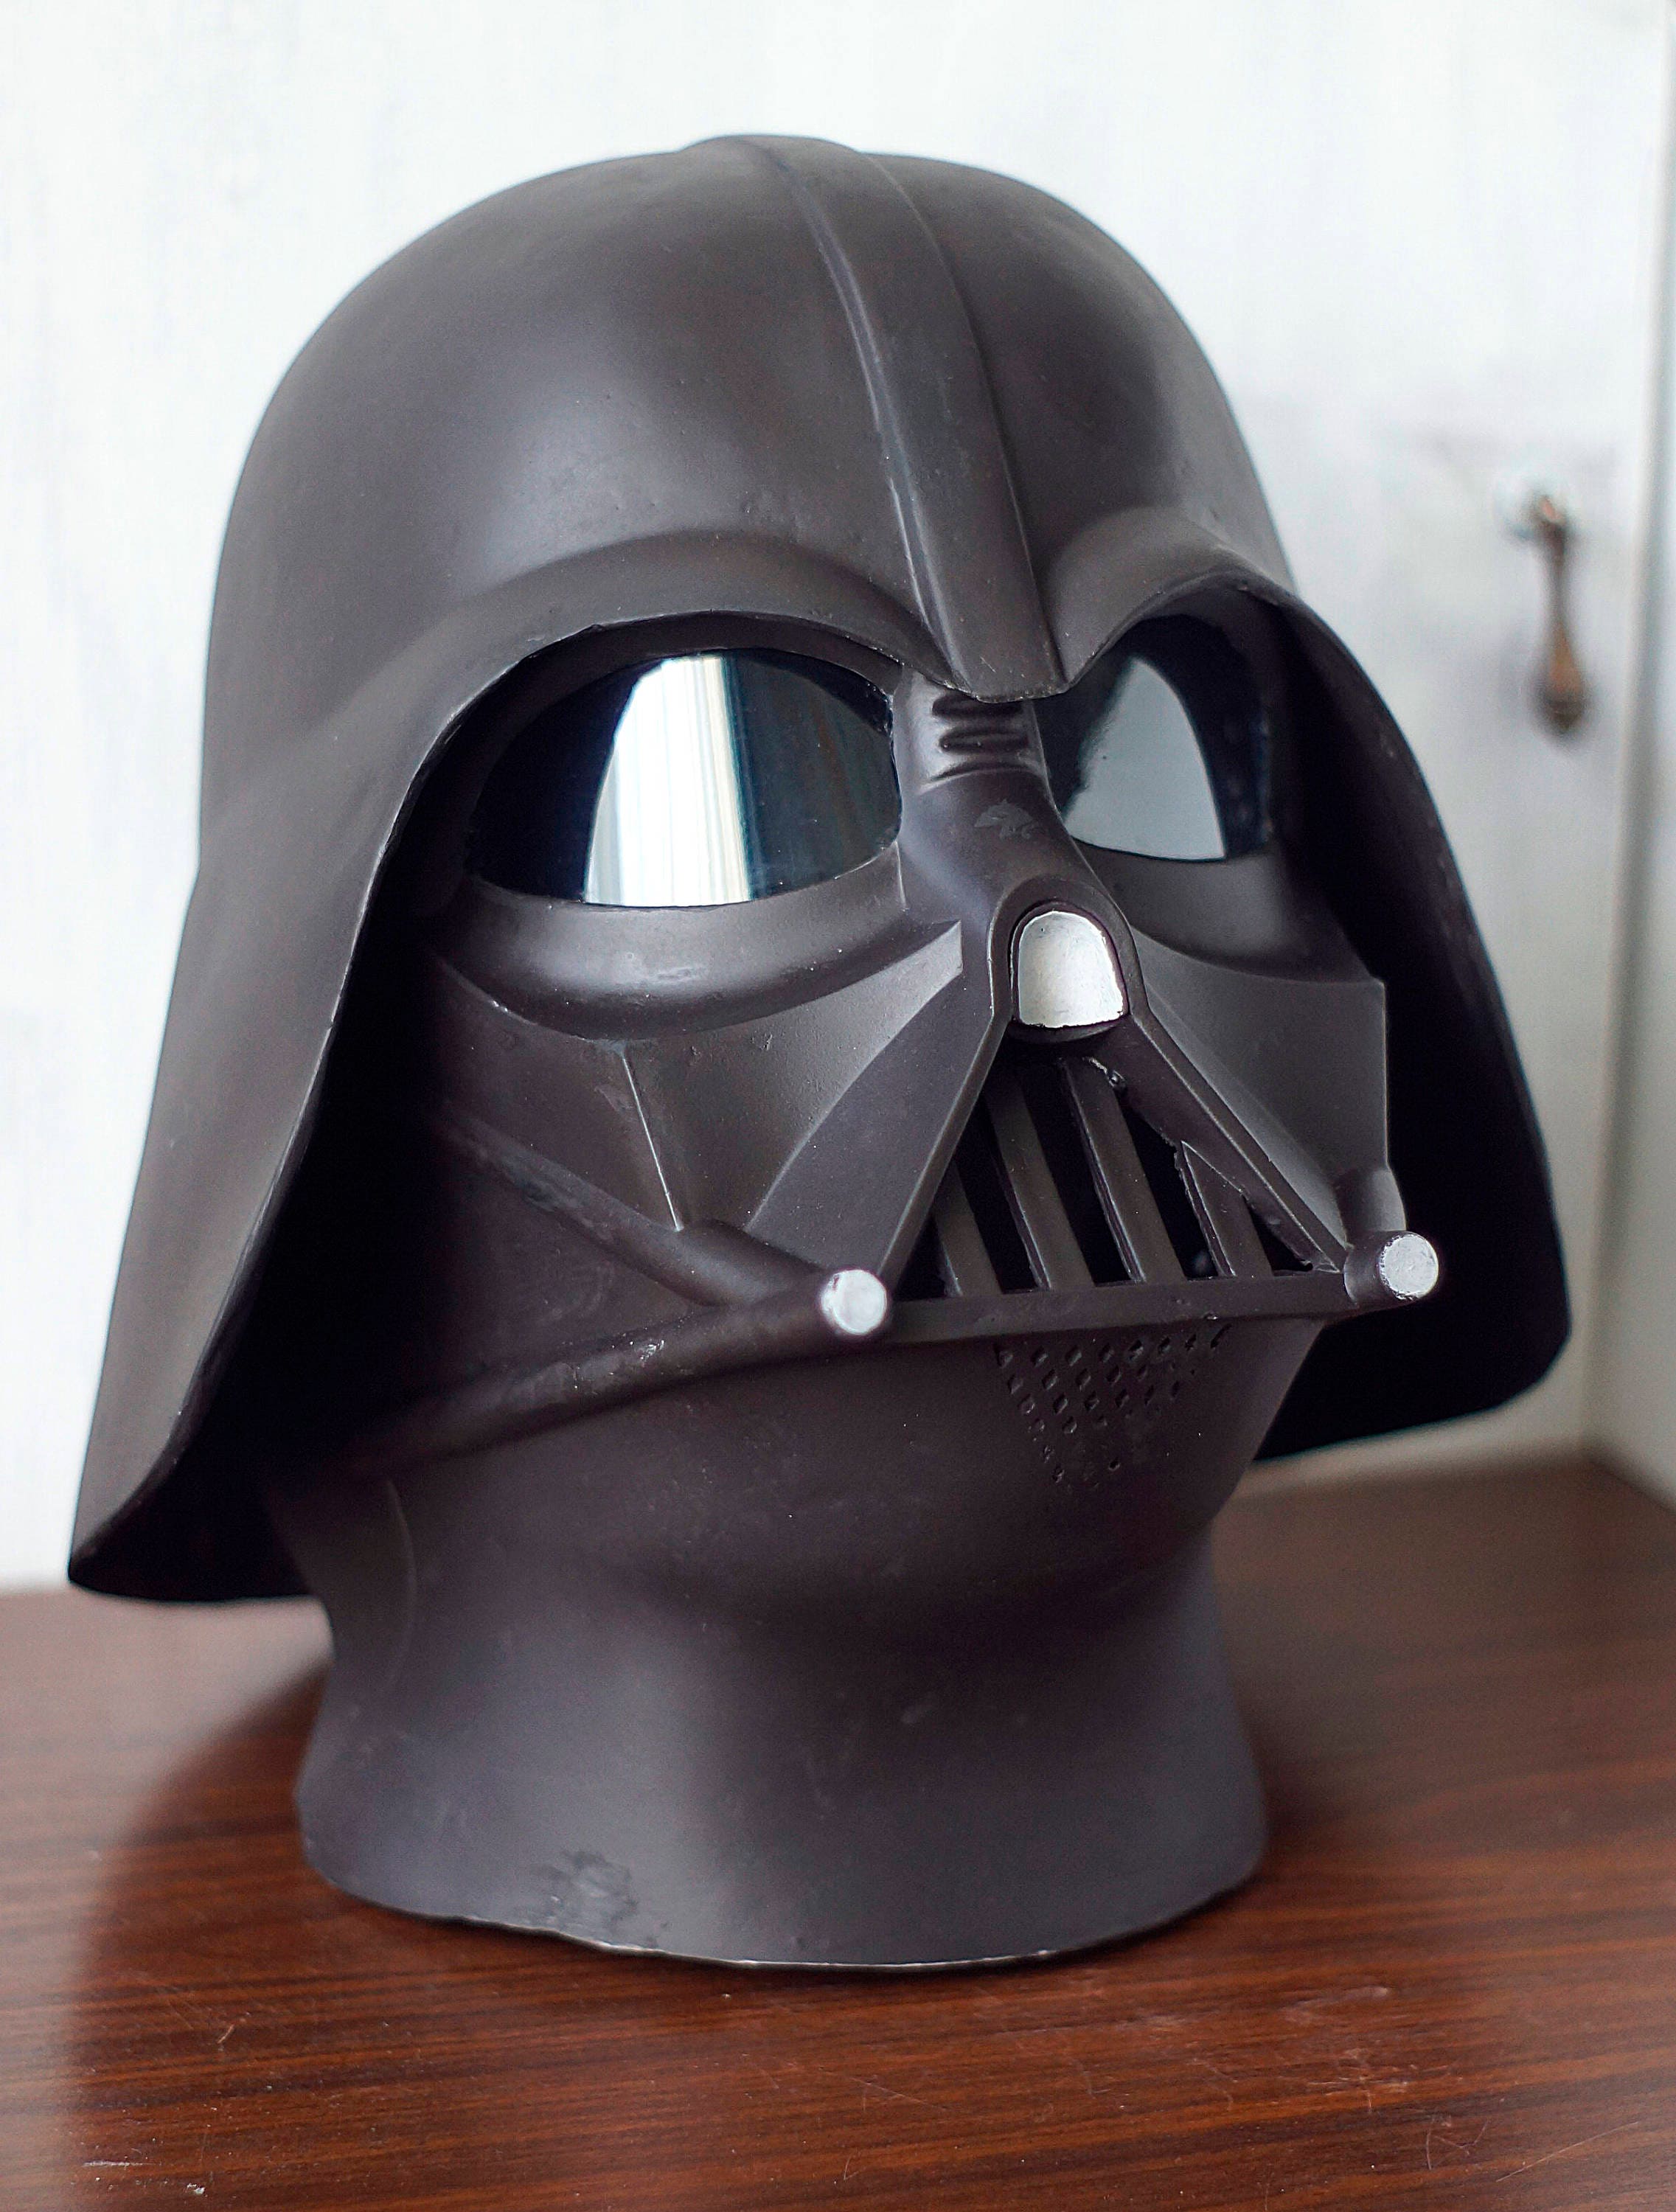 When will the Darth Vader helmet designs be released? 